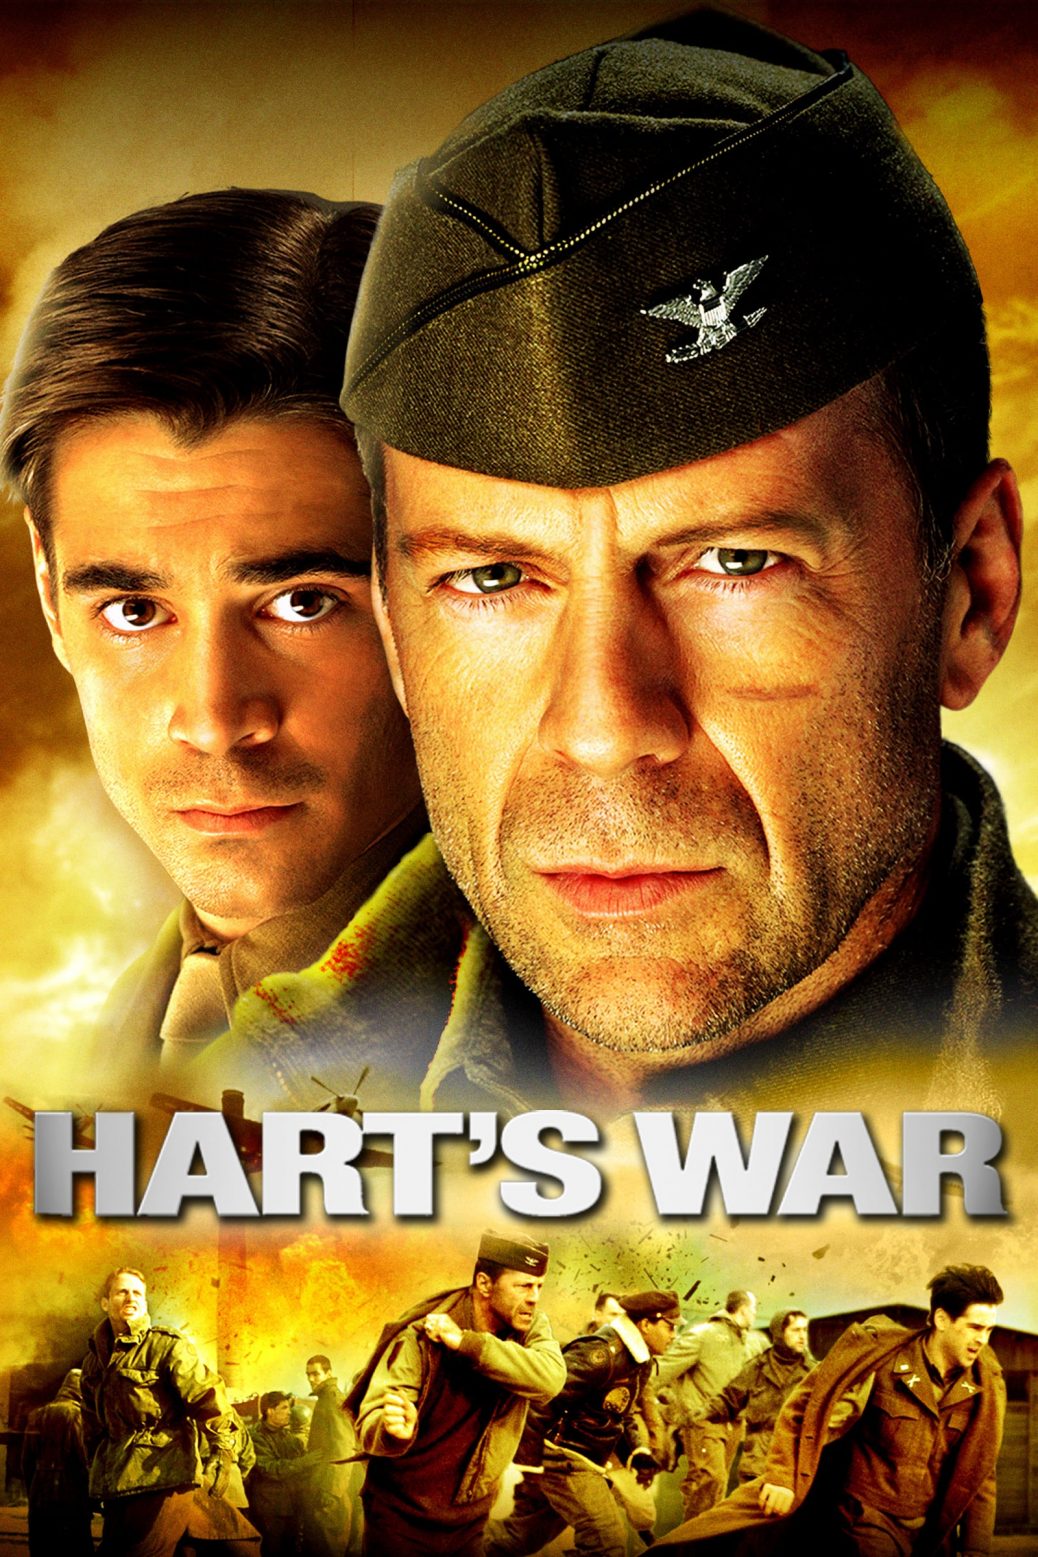 Poster for the movie "Hart's War"